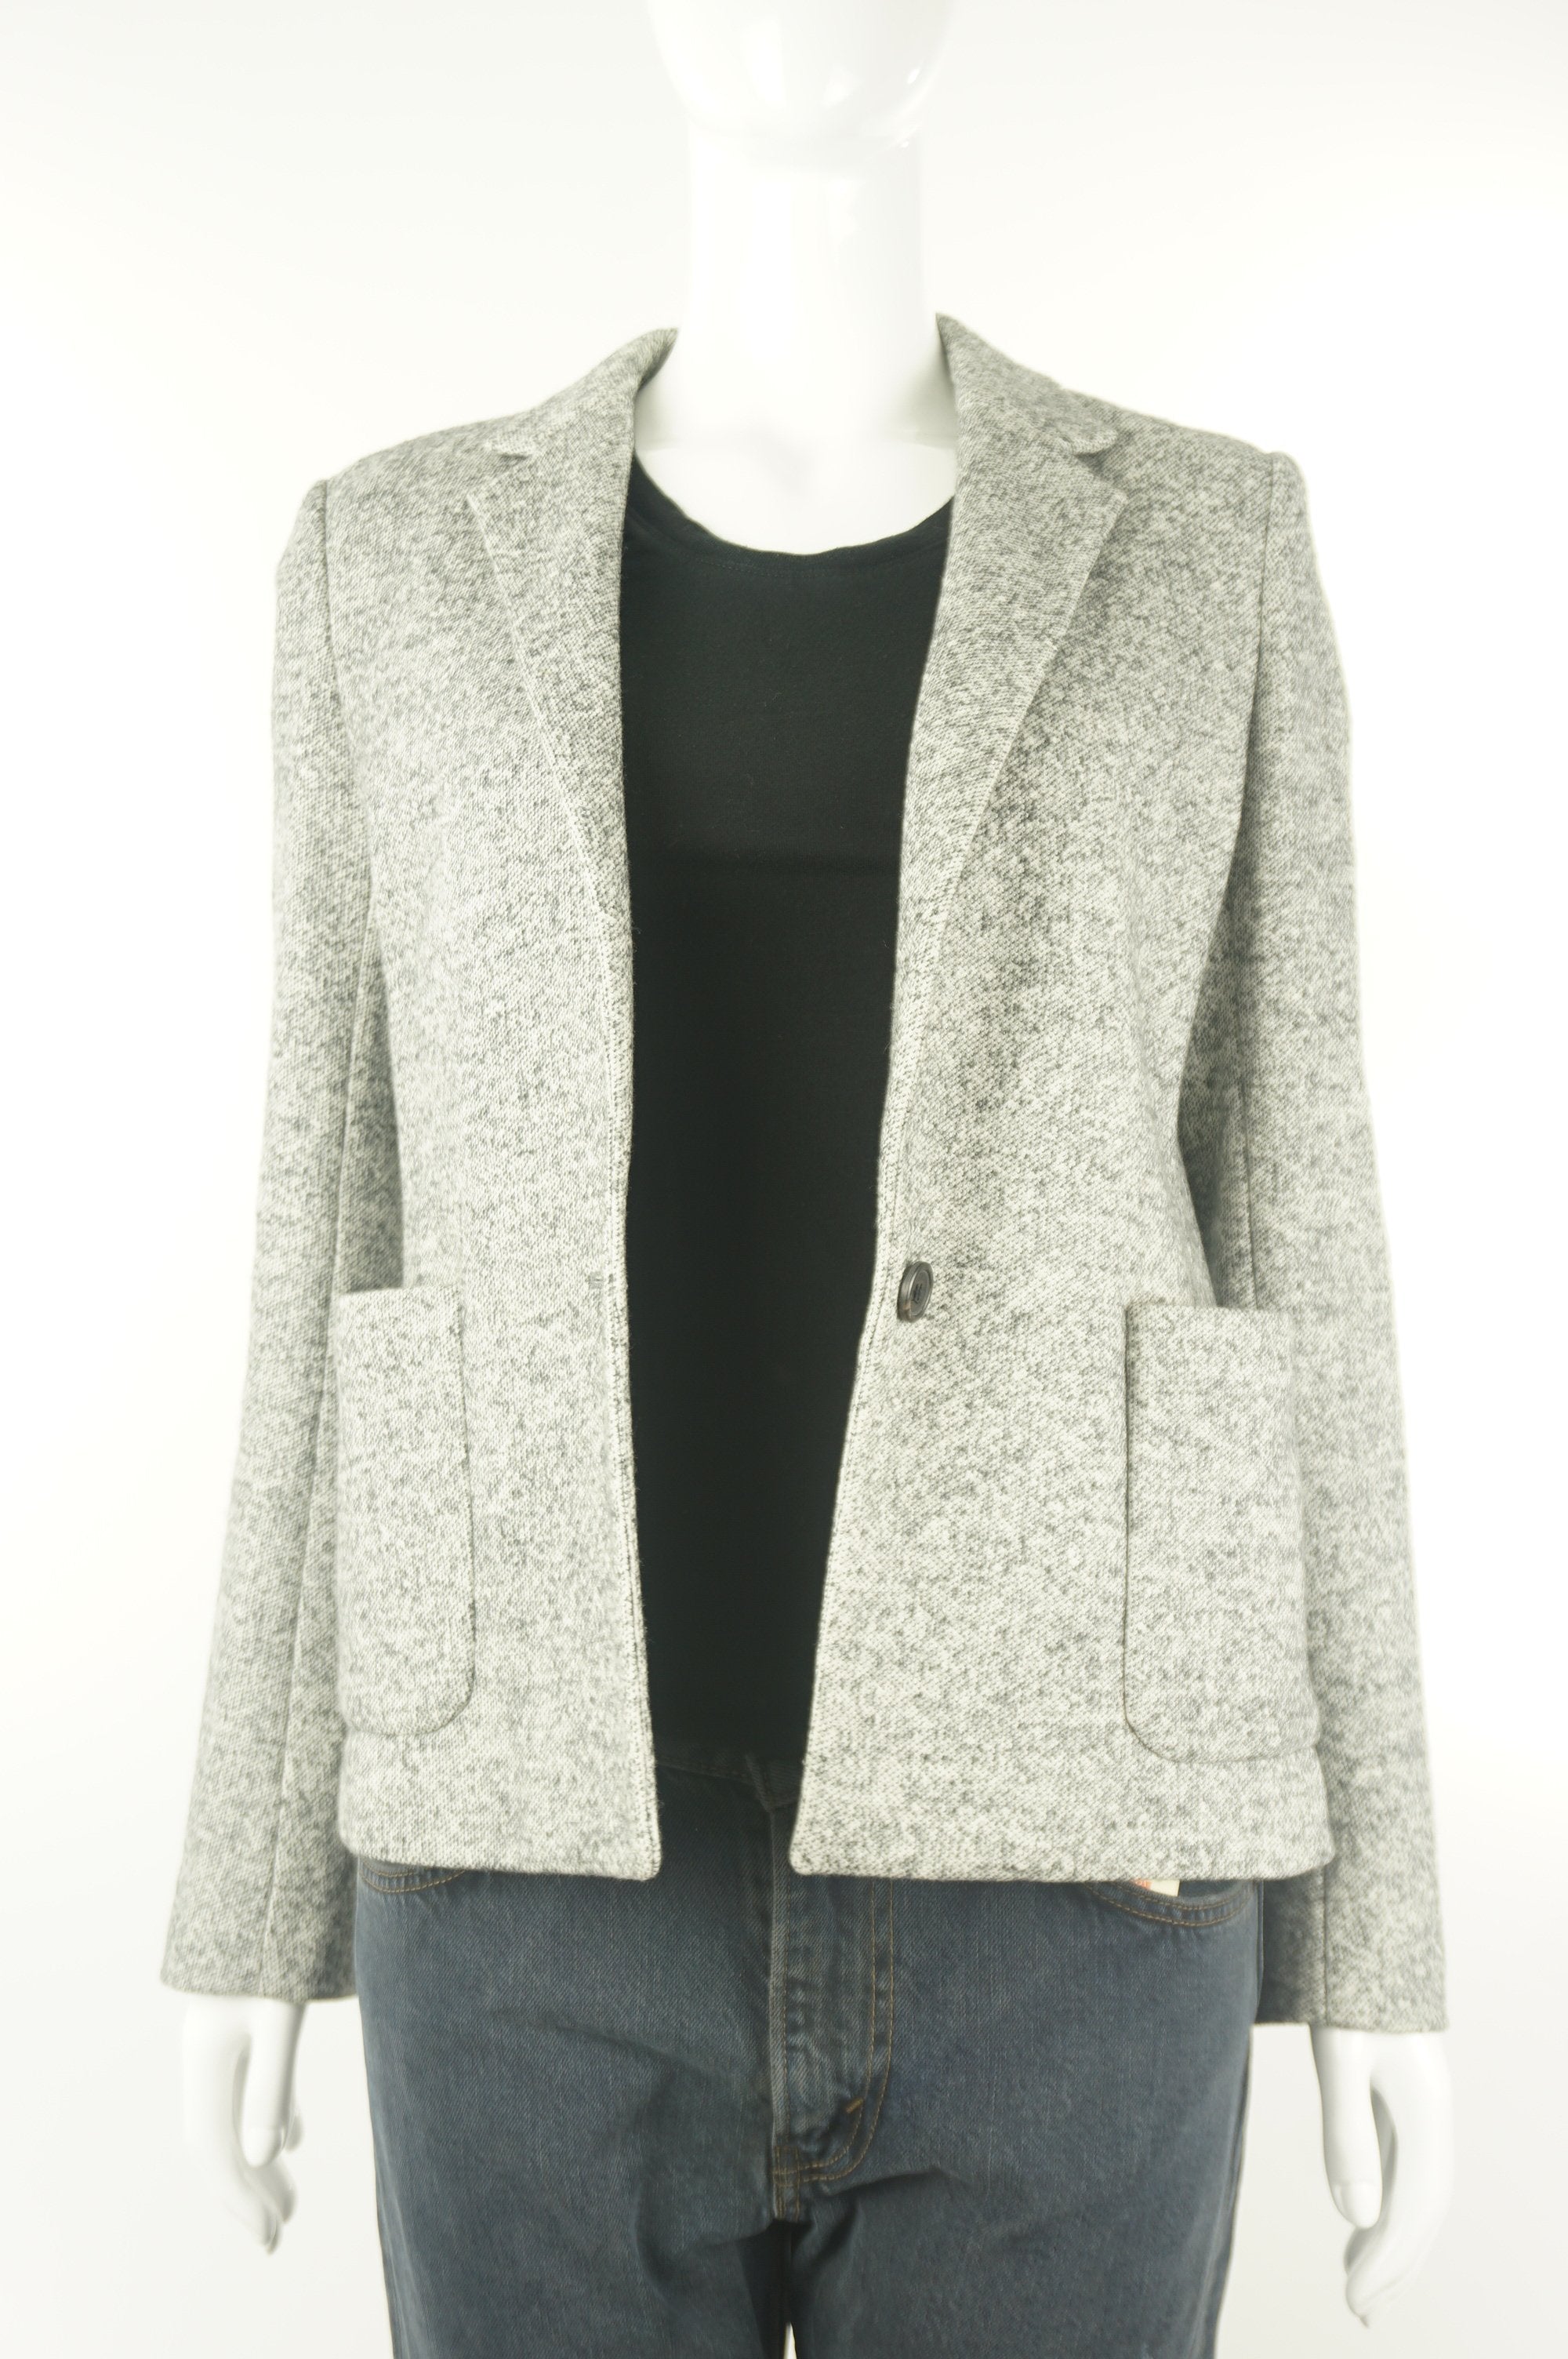 Wilfred Wool Blazer, Blazer for the office or wherever you want to impress:), Grey, 55% cotton, 45% wool., women's Jackets & Coats, women's Grey Jackets & Coats, Wilfred women's Jackets & Coats, Wilfred women's blazer, women's wool blazer, women's professional jacket, women's business blazer, women's business one-buttoned suit jacket, women's business one-buttoned vest jacket